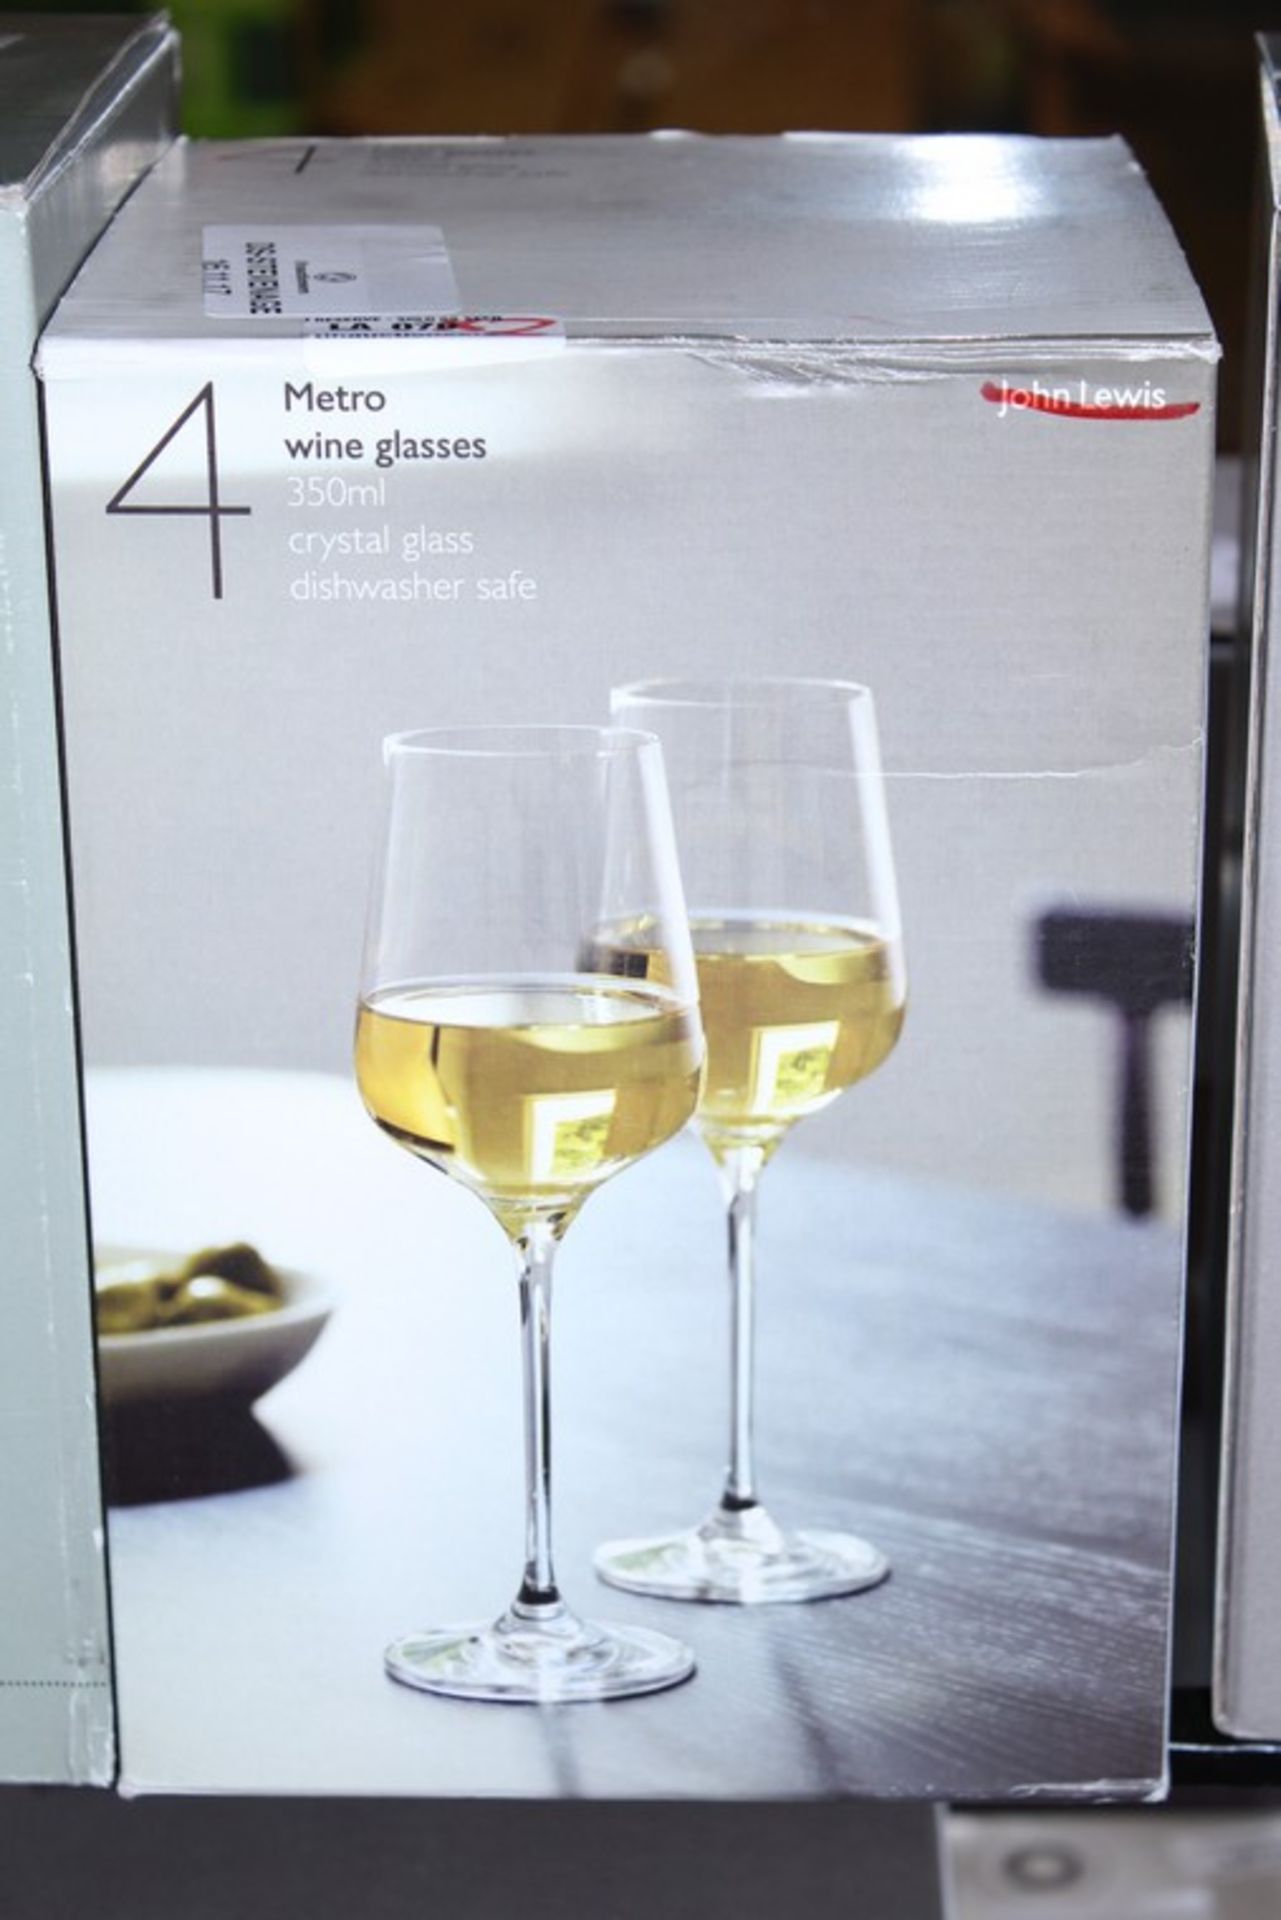 2 x ASSORTED BOXED ITEMS TO INCLUDE 4 METRO WINE GLASSES AND LSA INTERNATION WINE GLASSES (16/11/17)